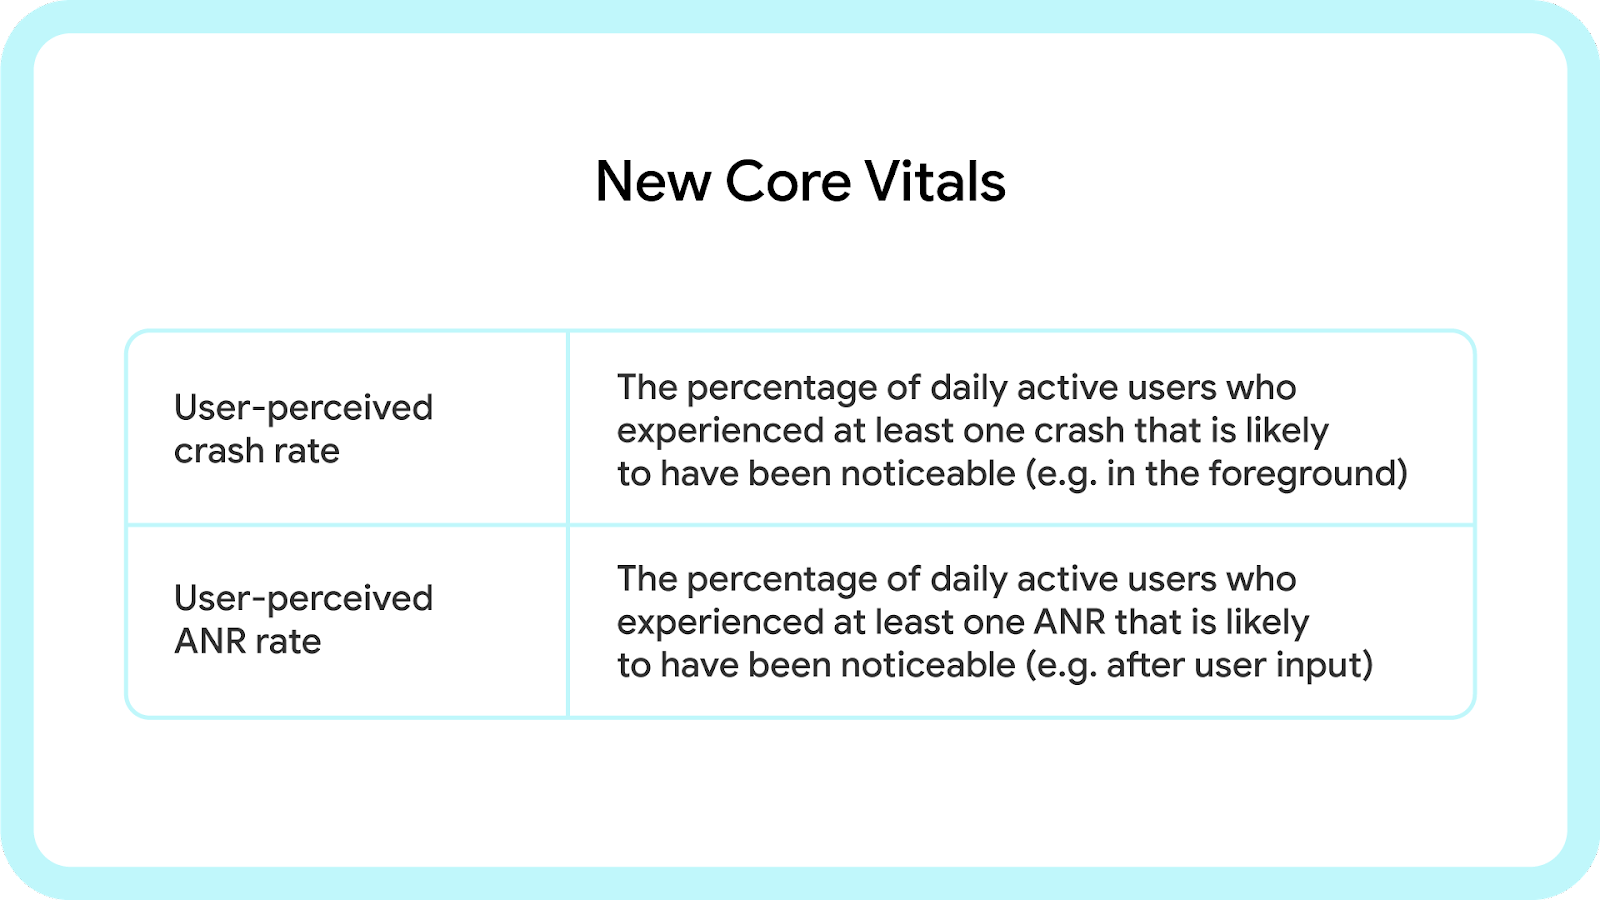 New Core Vitals for apps from Google Play